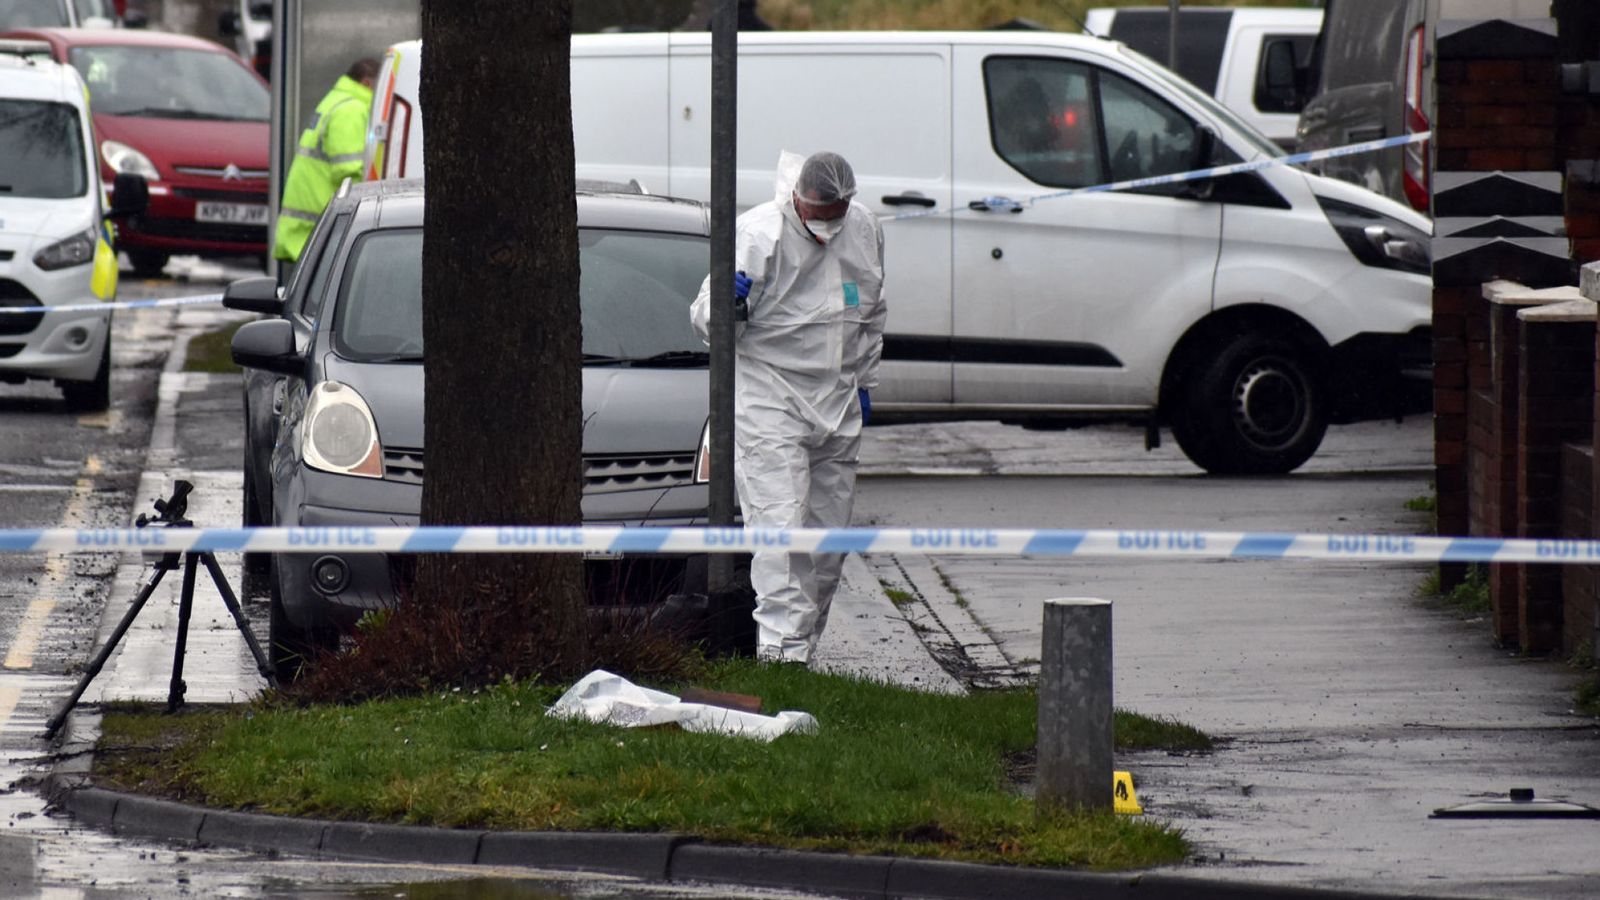 Police To Investigate Double Murder At Cannabis Factory